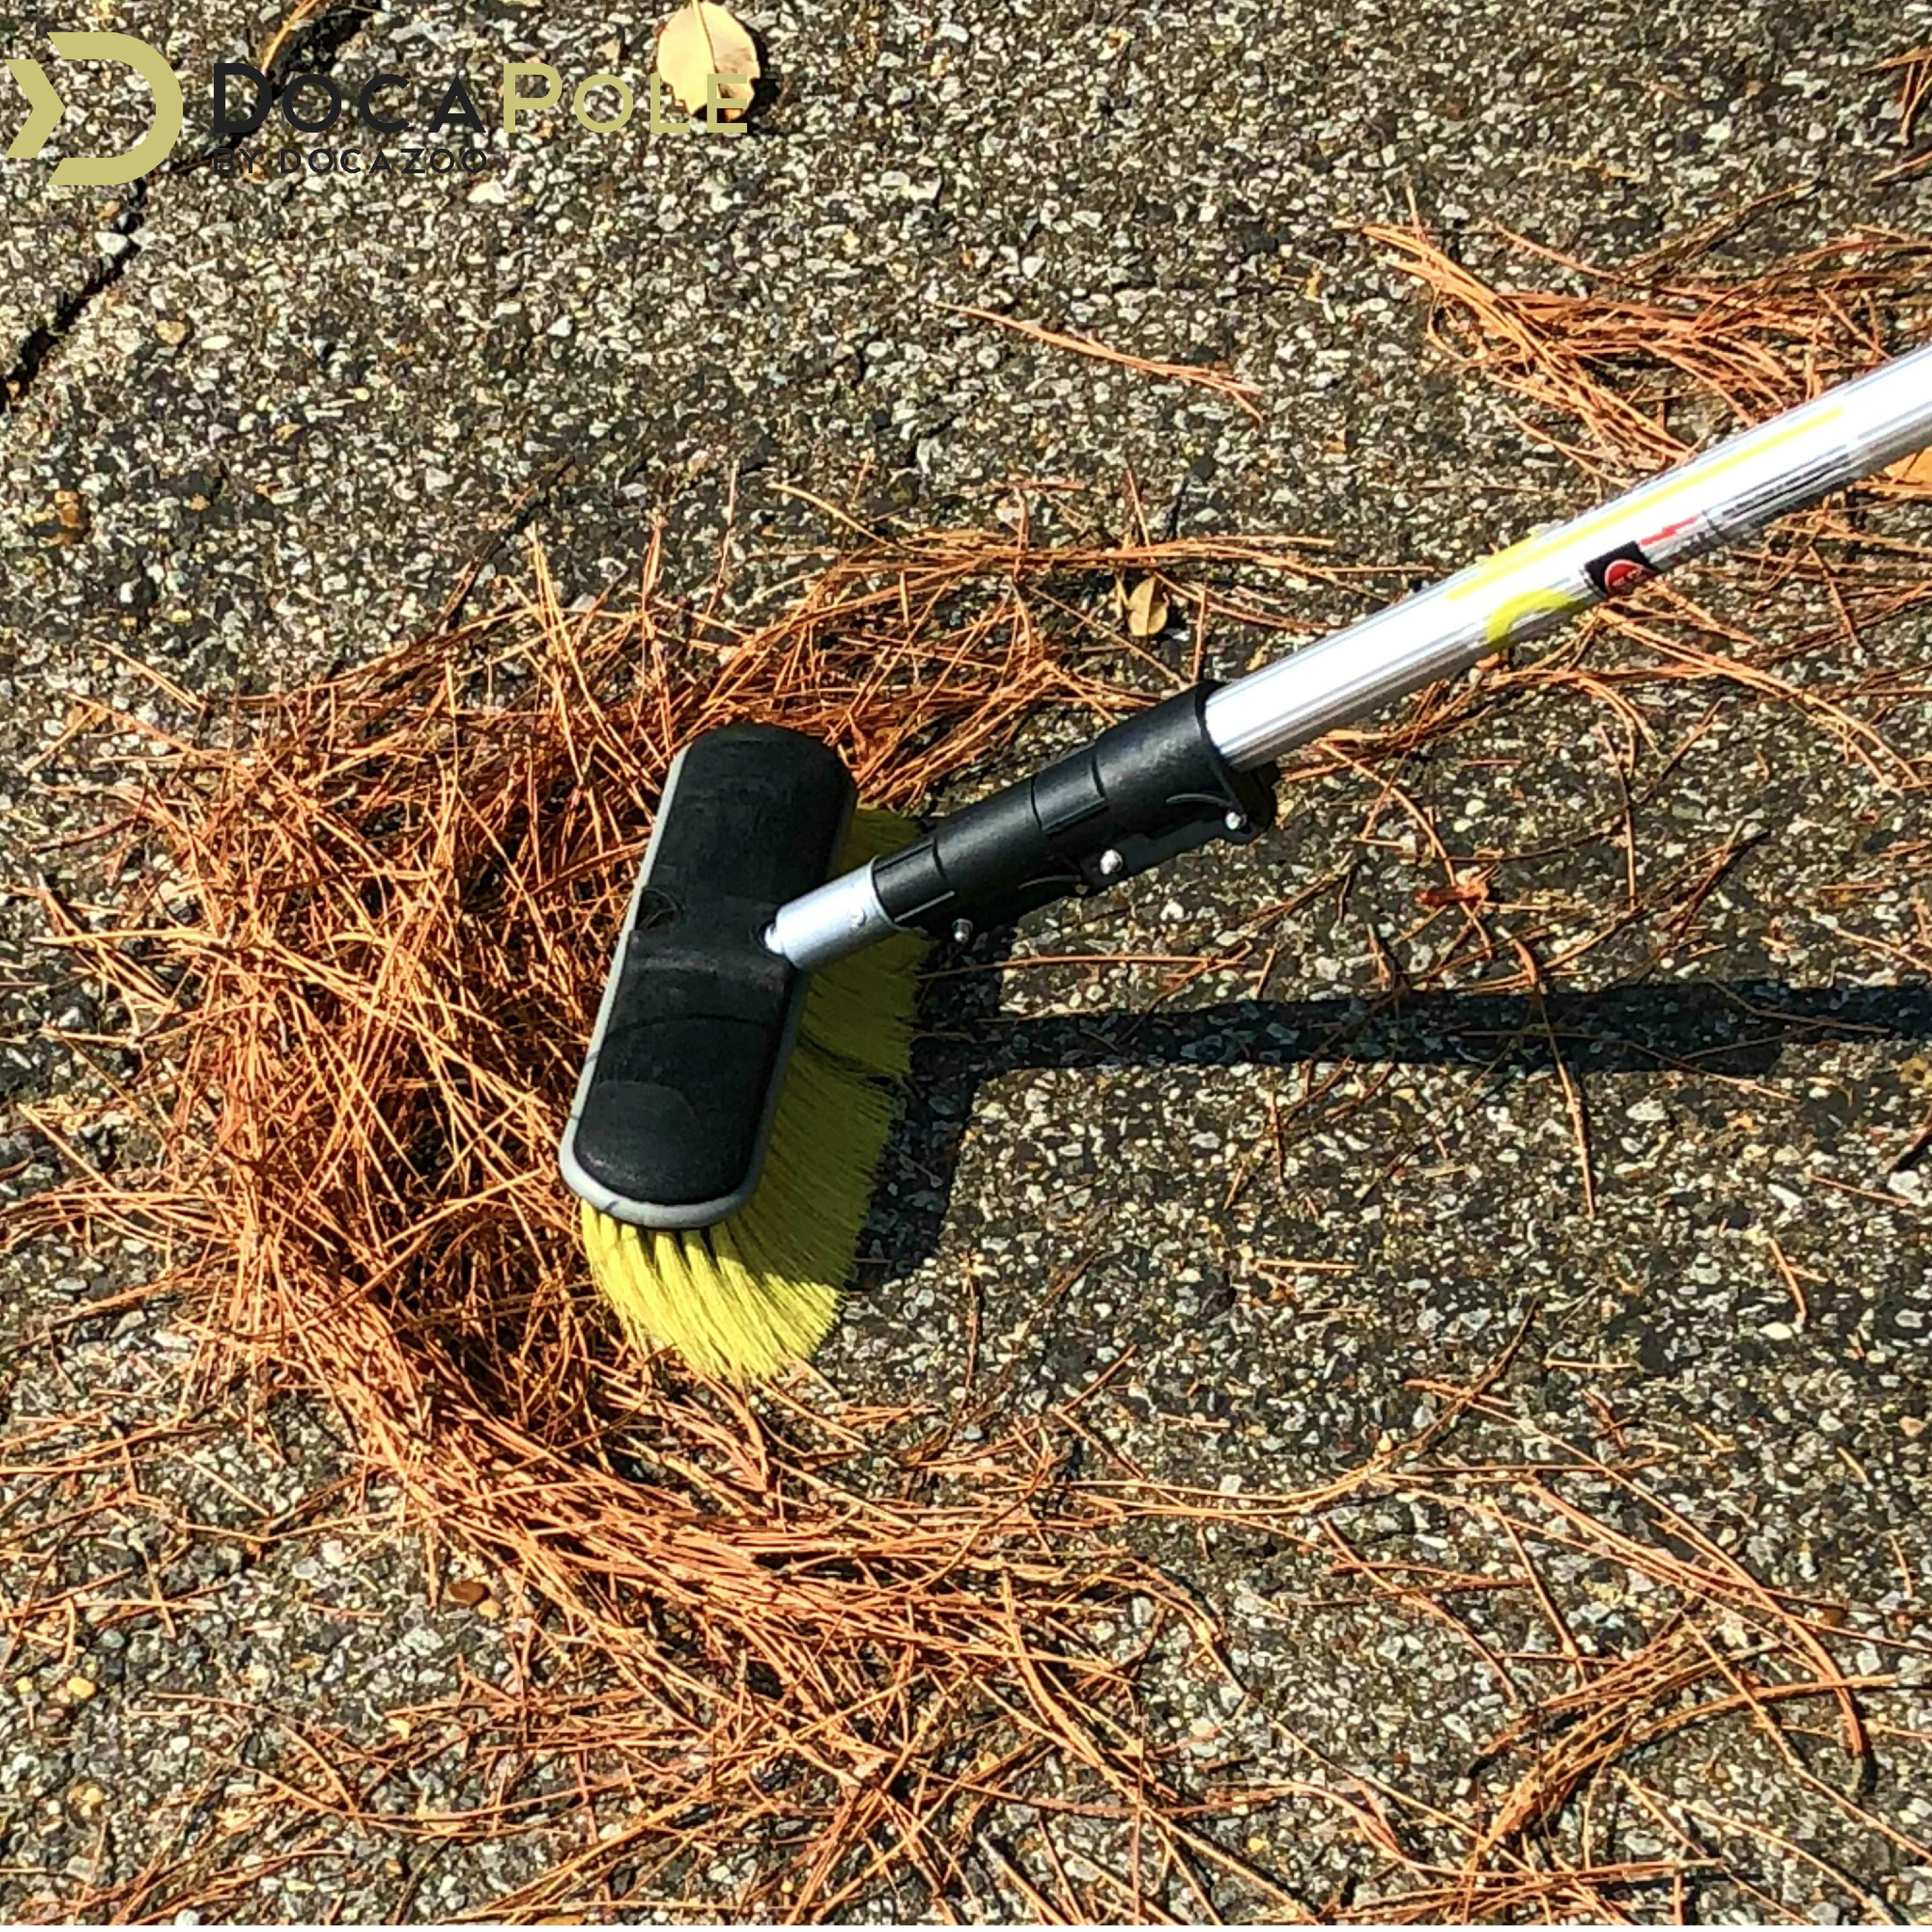 DocaPole 5-12 Foot (20 ft Reach) Extension Pole and 11” Hard Bristle Brush  for House Siding, Deck, Garage, Patio and More